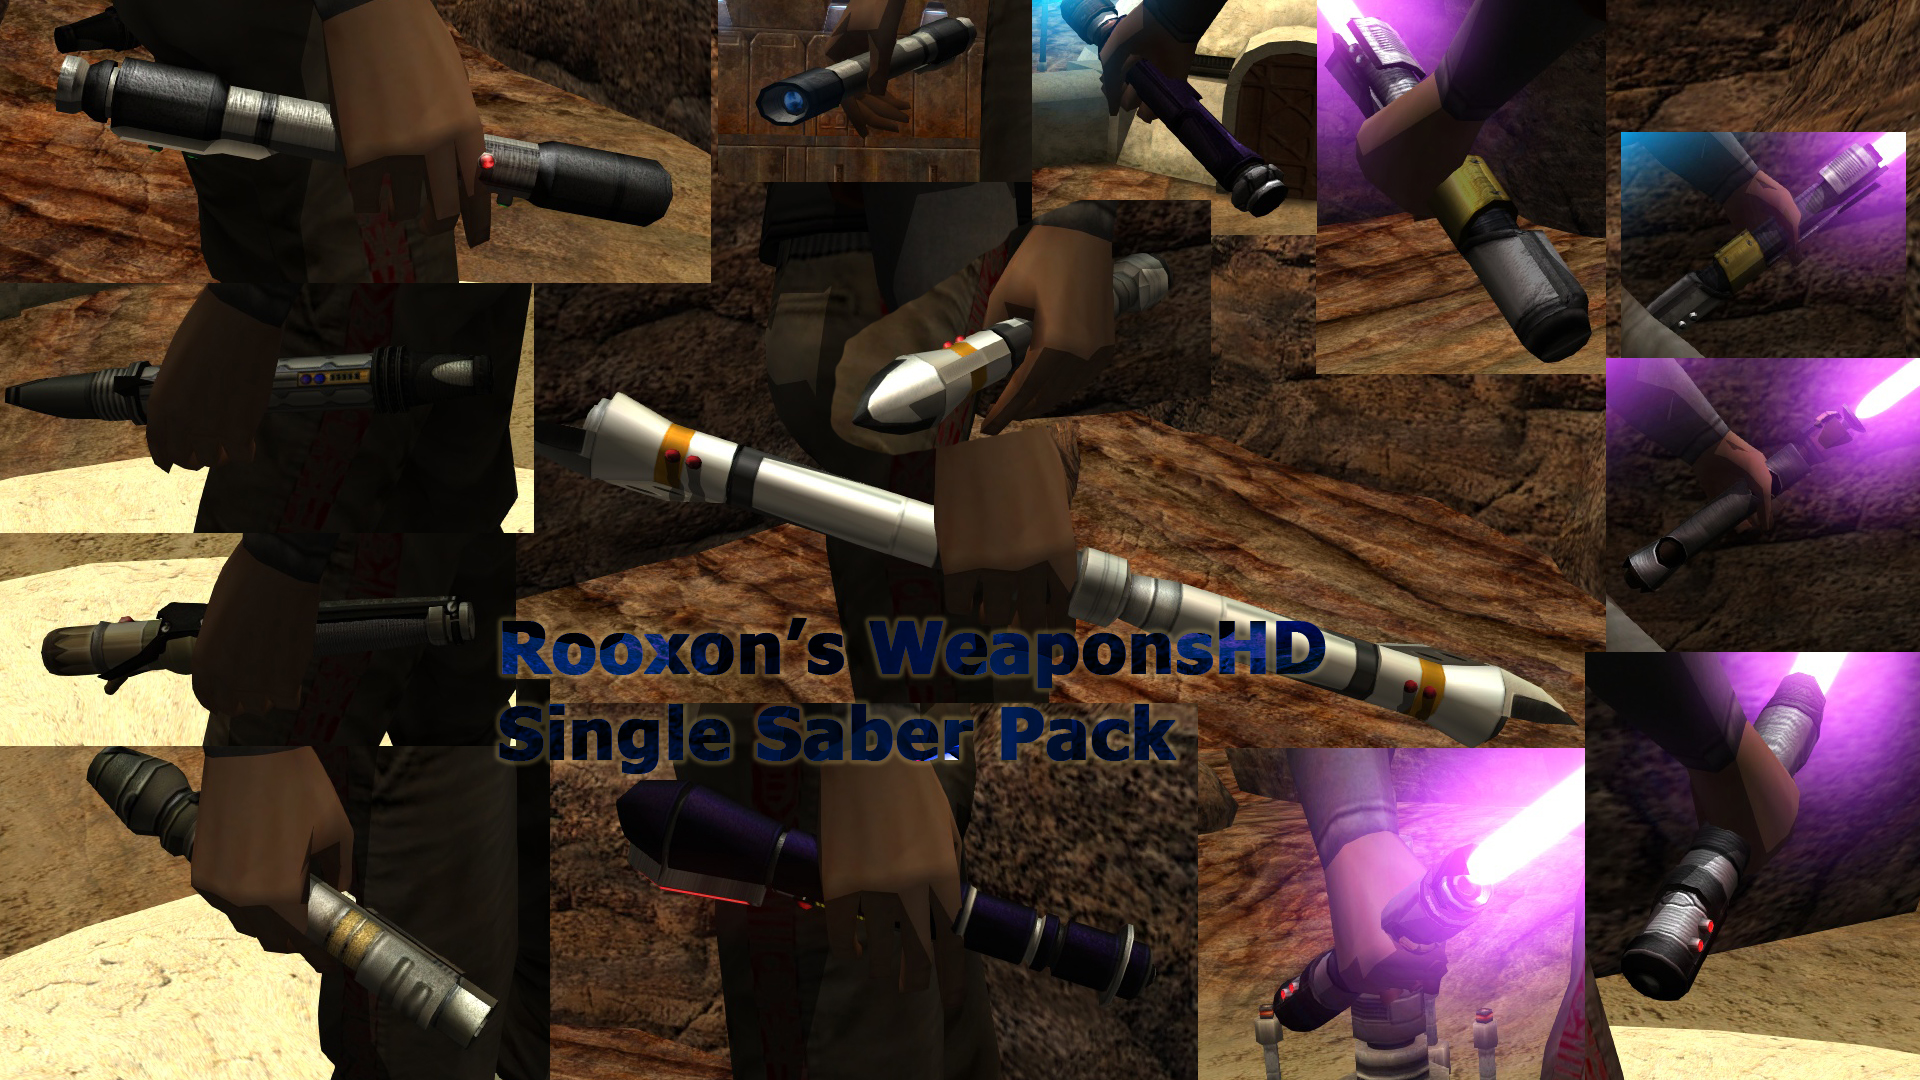 More information about "Single Saber Pack - Rooxon's WeaponsHD"